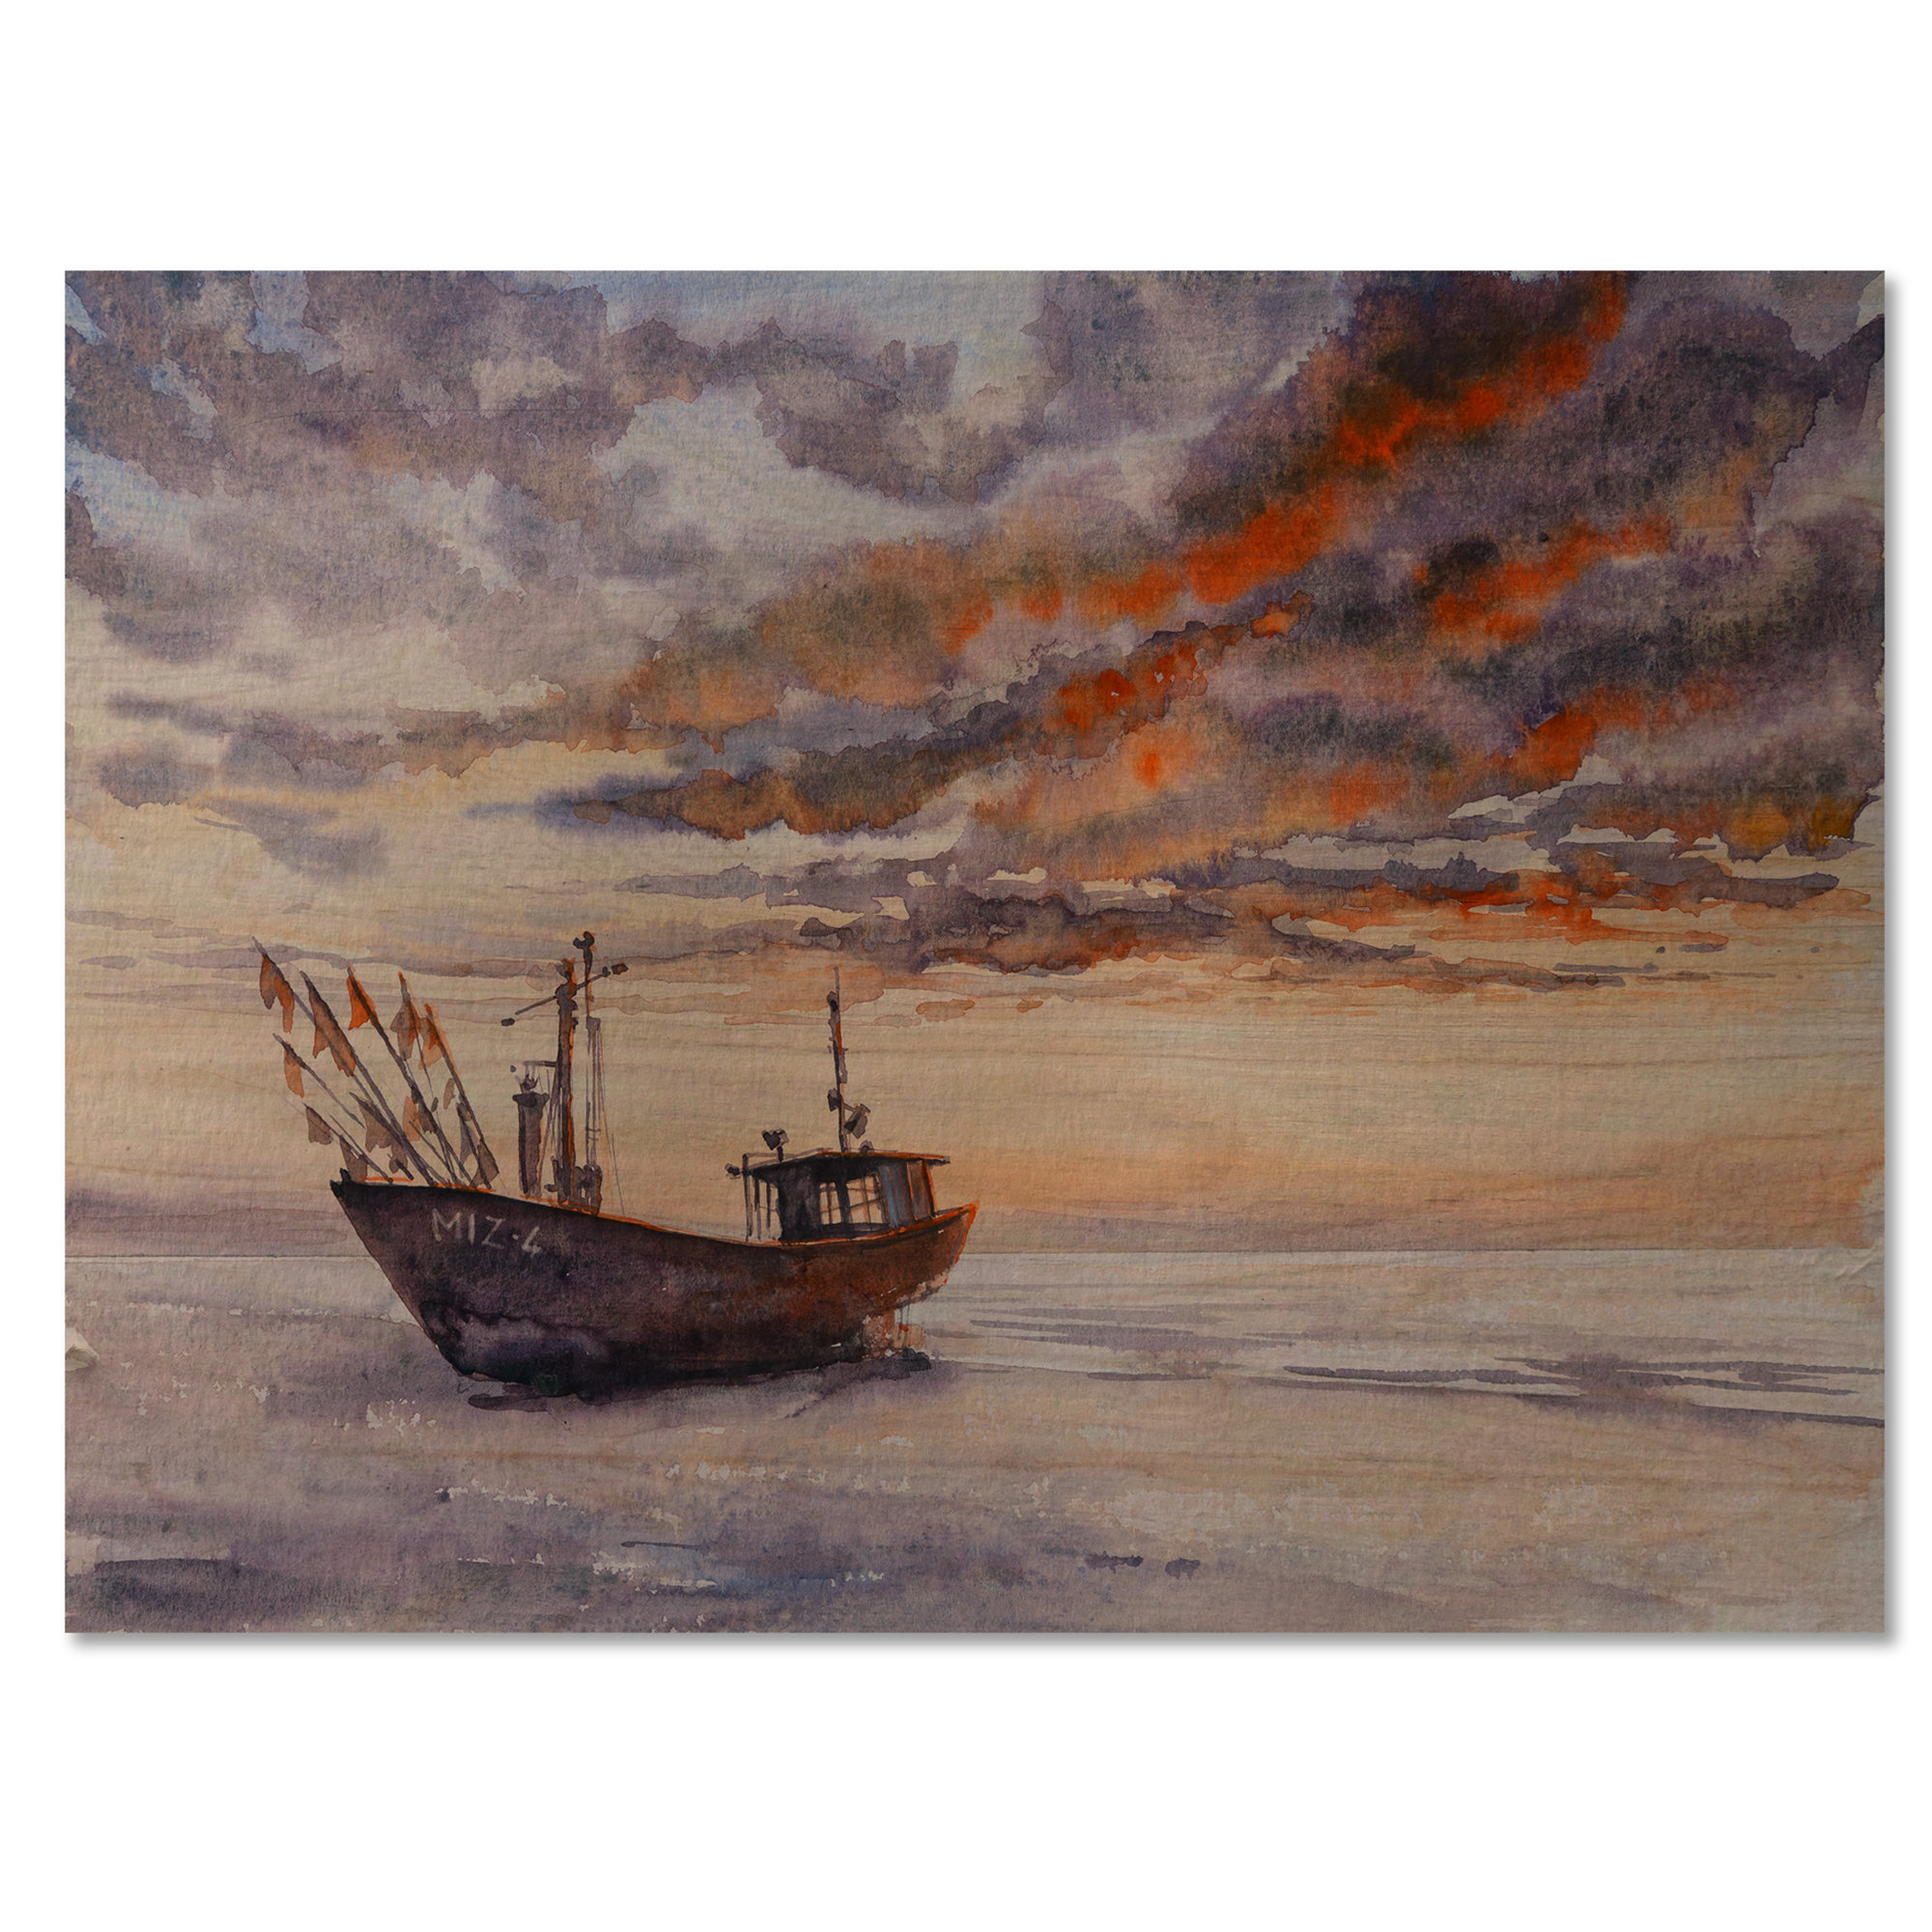 Rustic Port with A Fishing Boat V - Unframed Print On Wood Breakwater Bay Size: 24 H x 32 W x 1 D